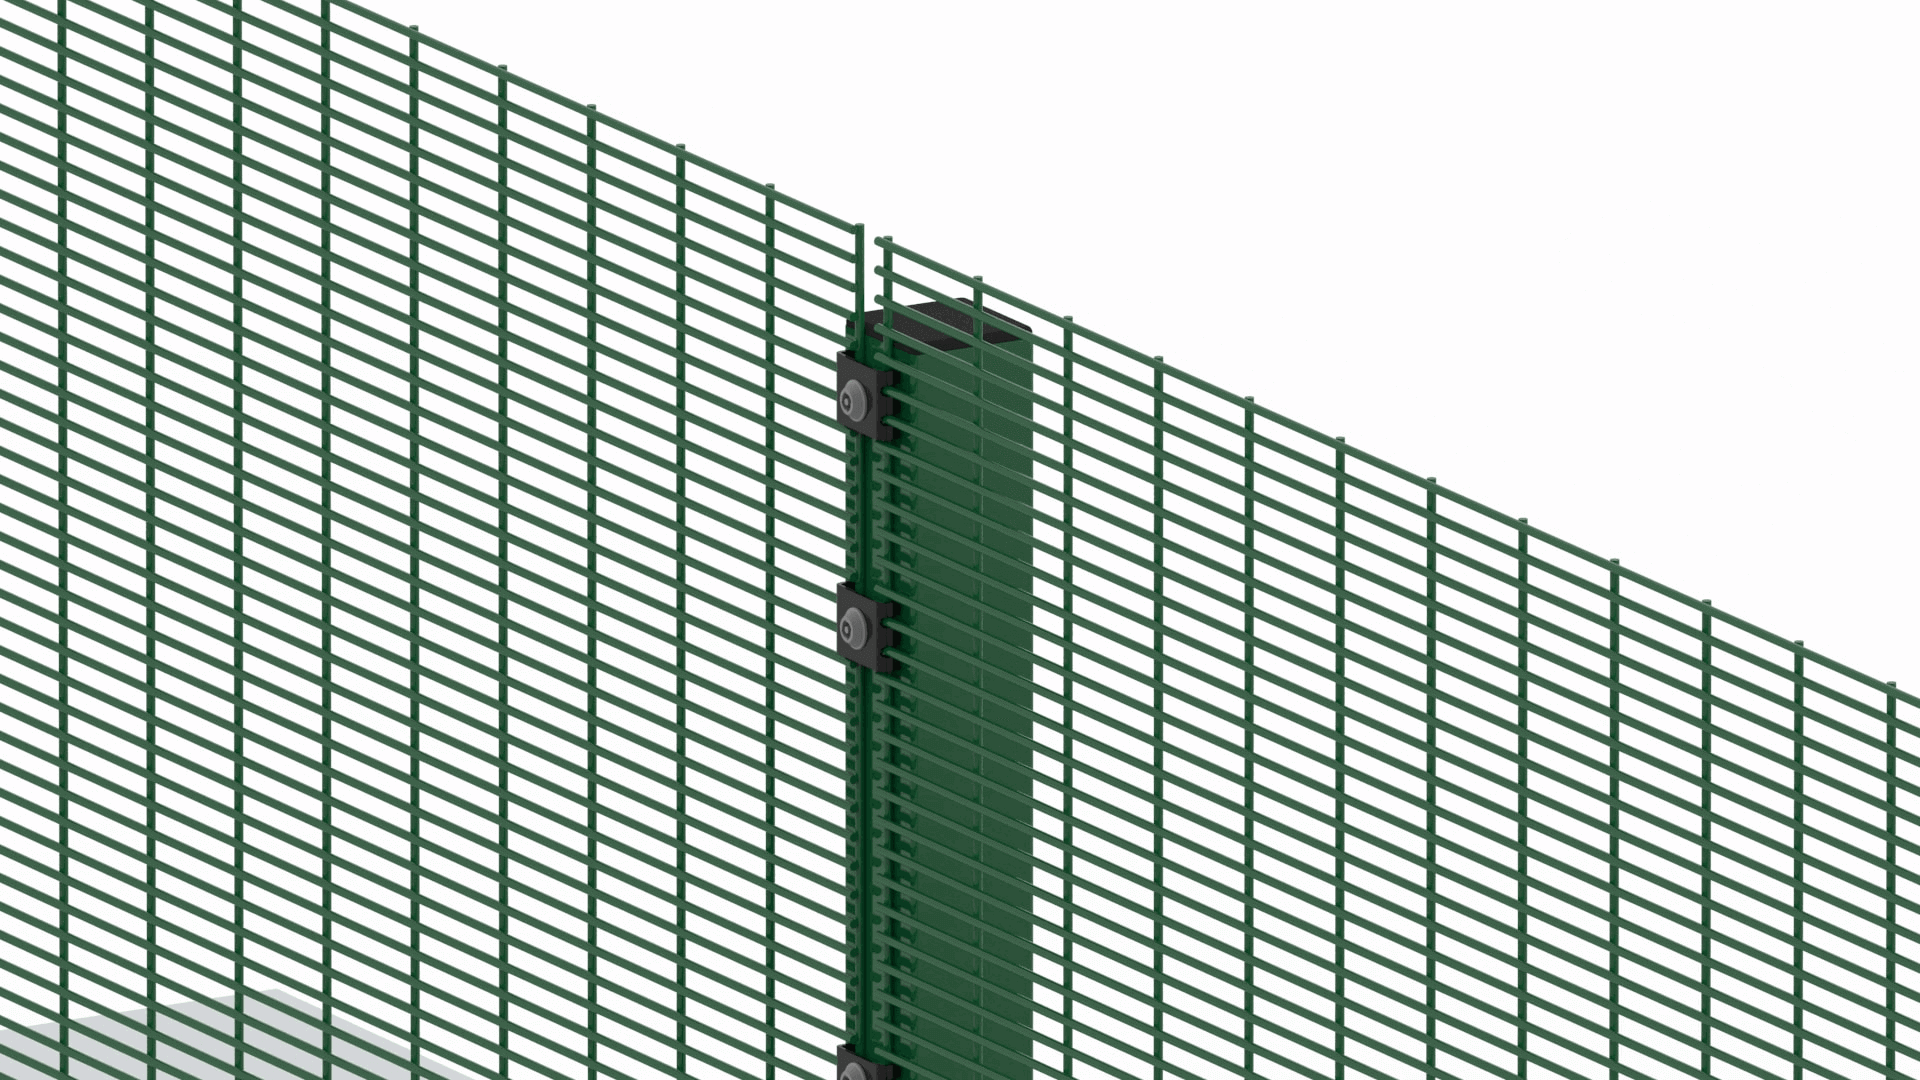 358 Welded Wire Fence: A Versatile Solution for Residential and Commercial Applications